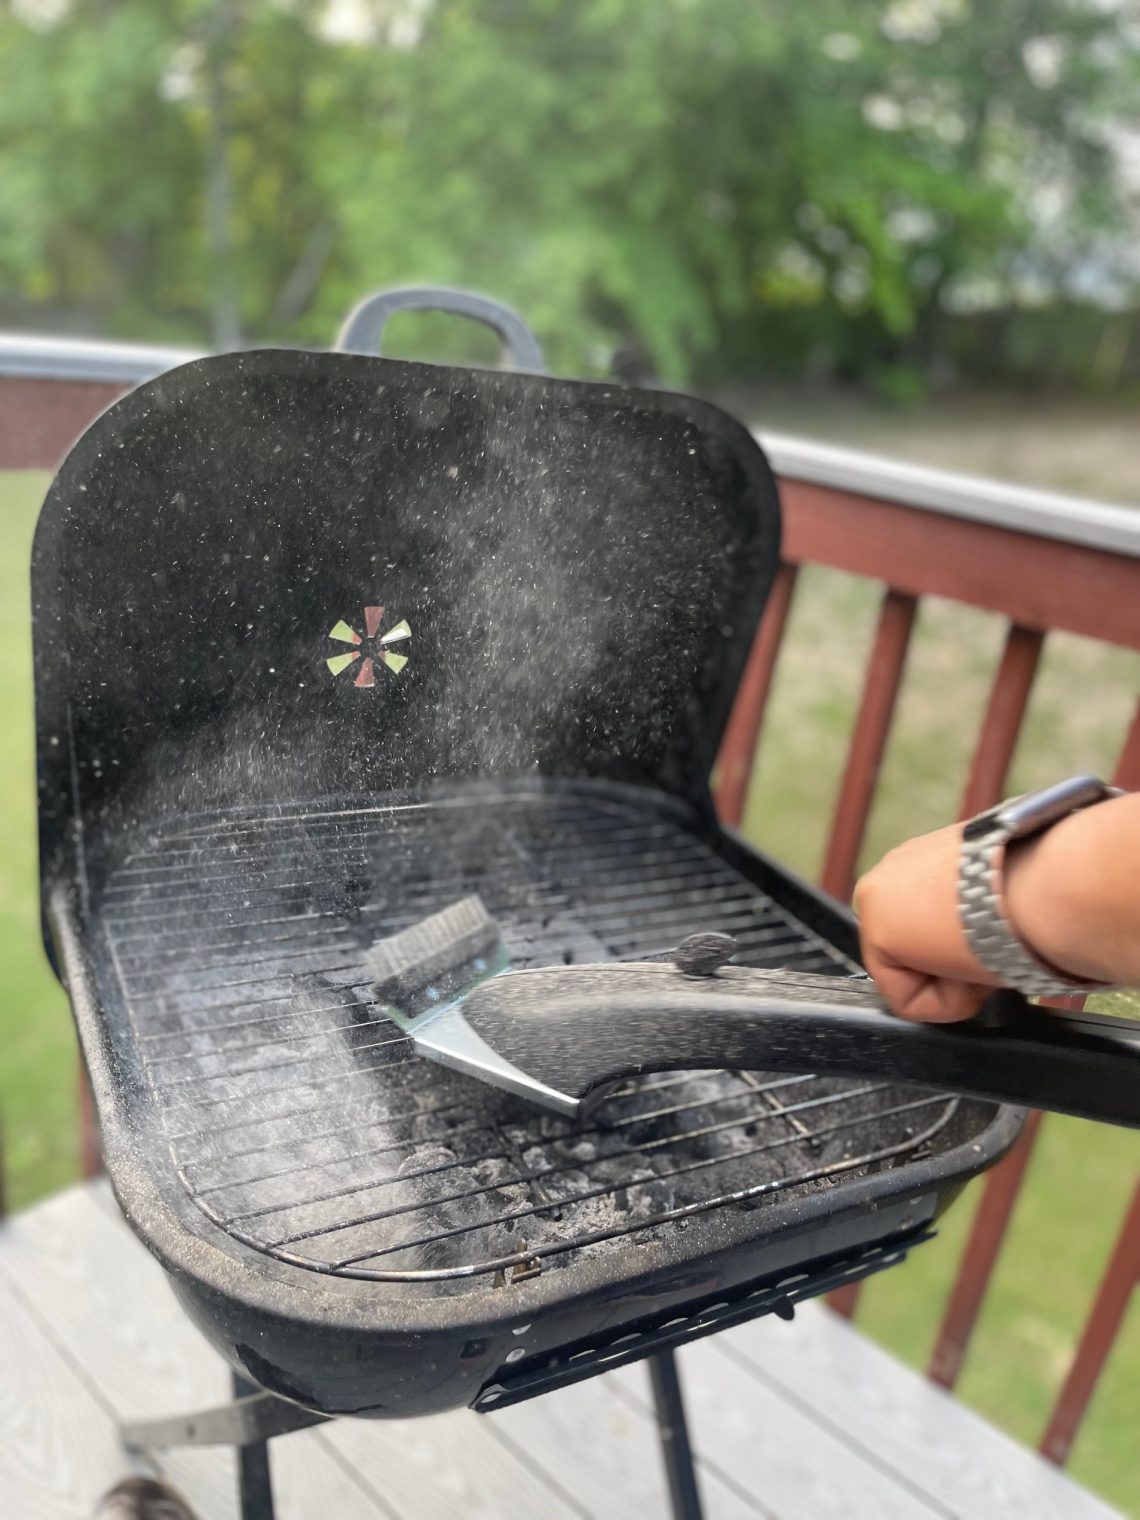 Make Cleaning Up Your Grill Easier With the Grill Daddy Brush